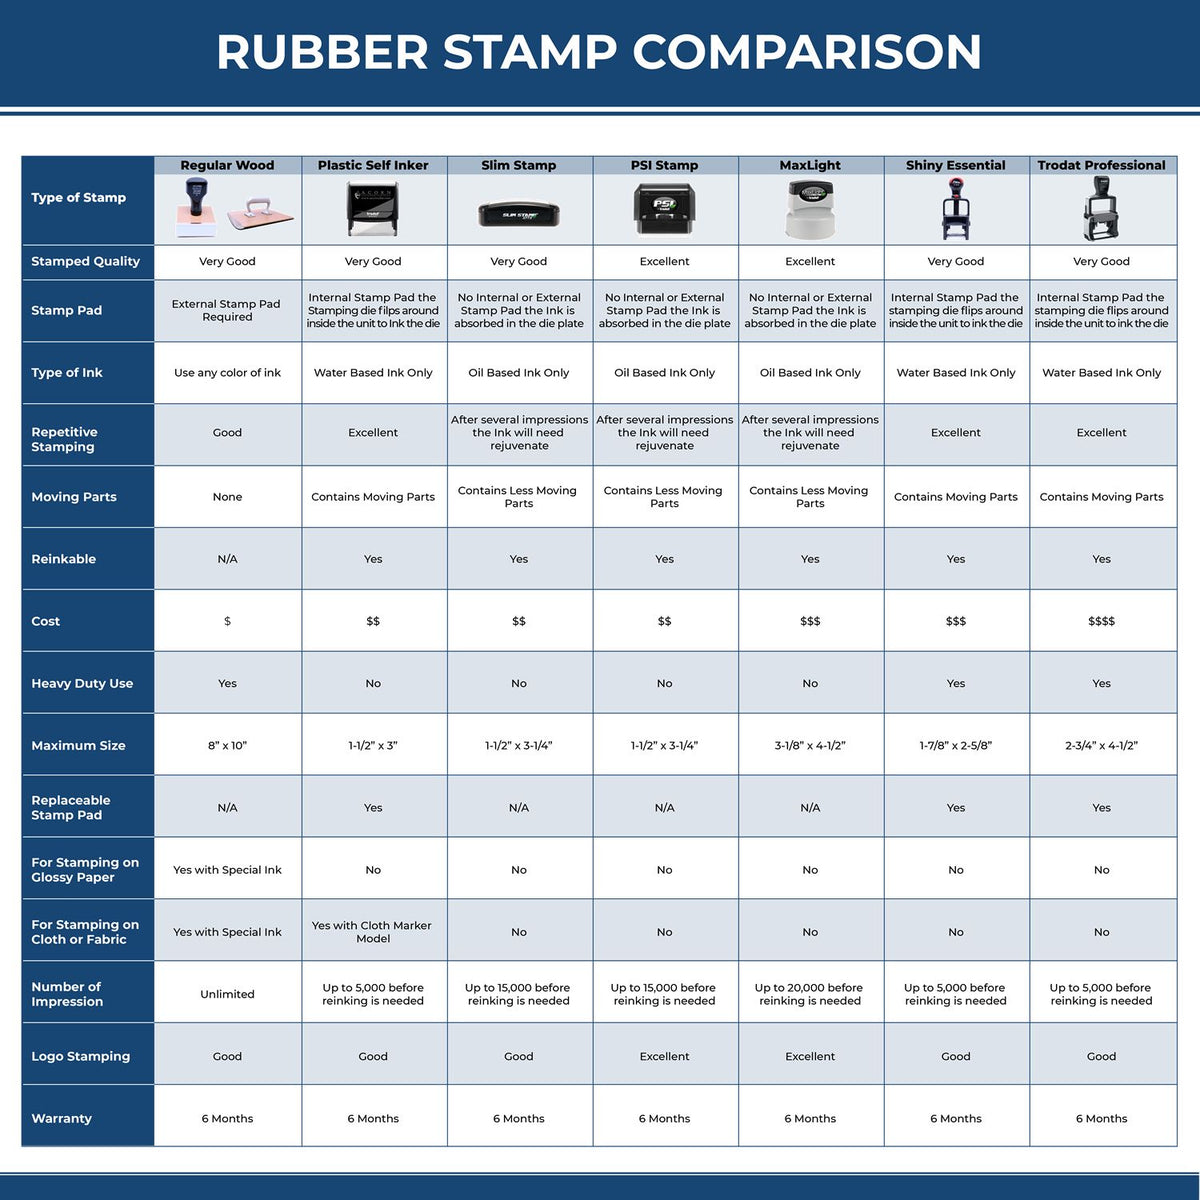 Large Confidential Rubber Stamp 4113R Rubber Stamp Comparison